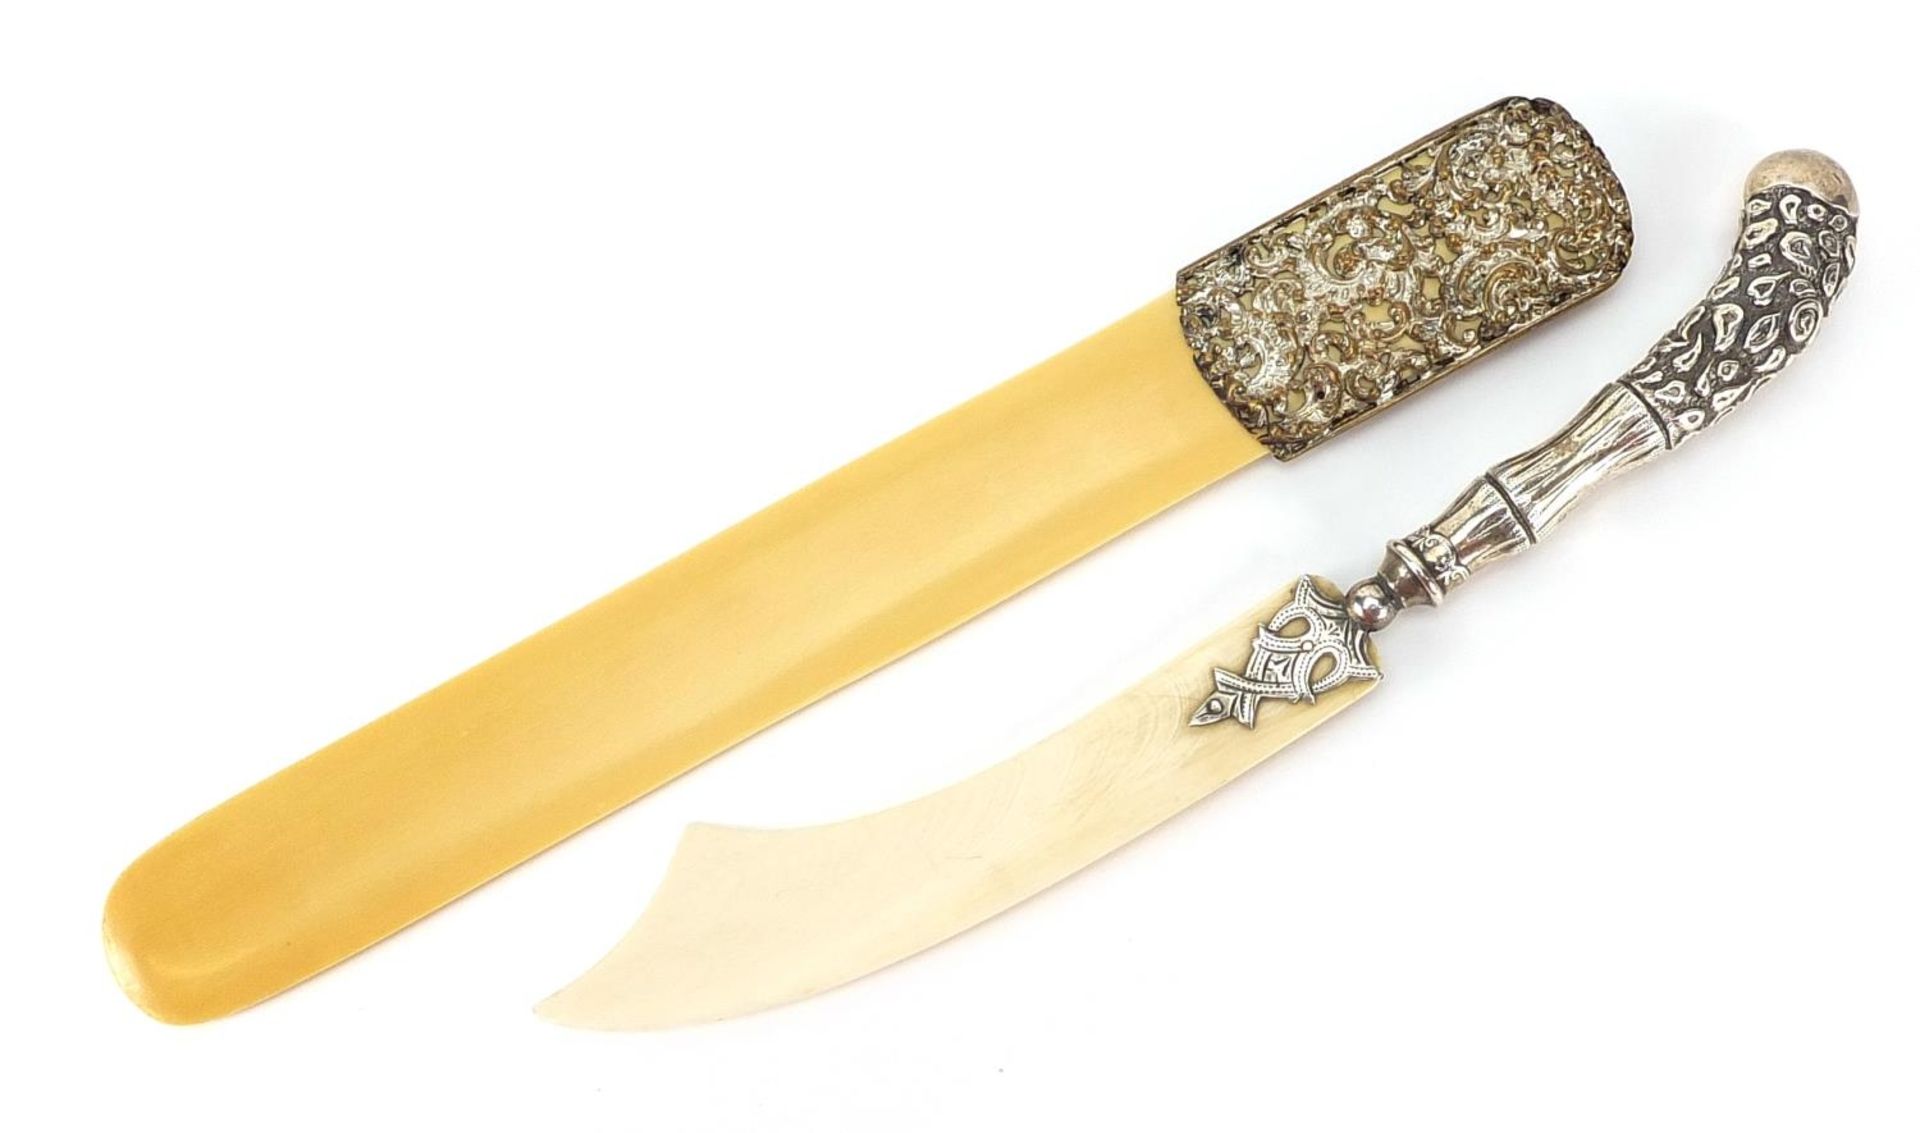 Ivorine page turner and a letter opener with silver handle, the largest 25cm in length